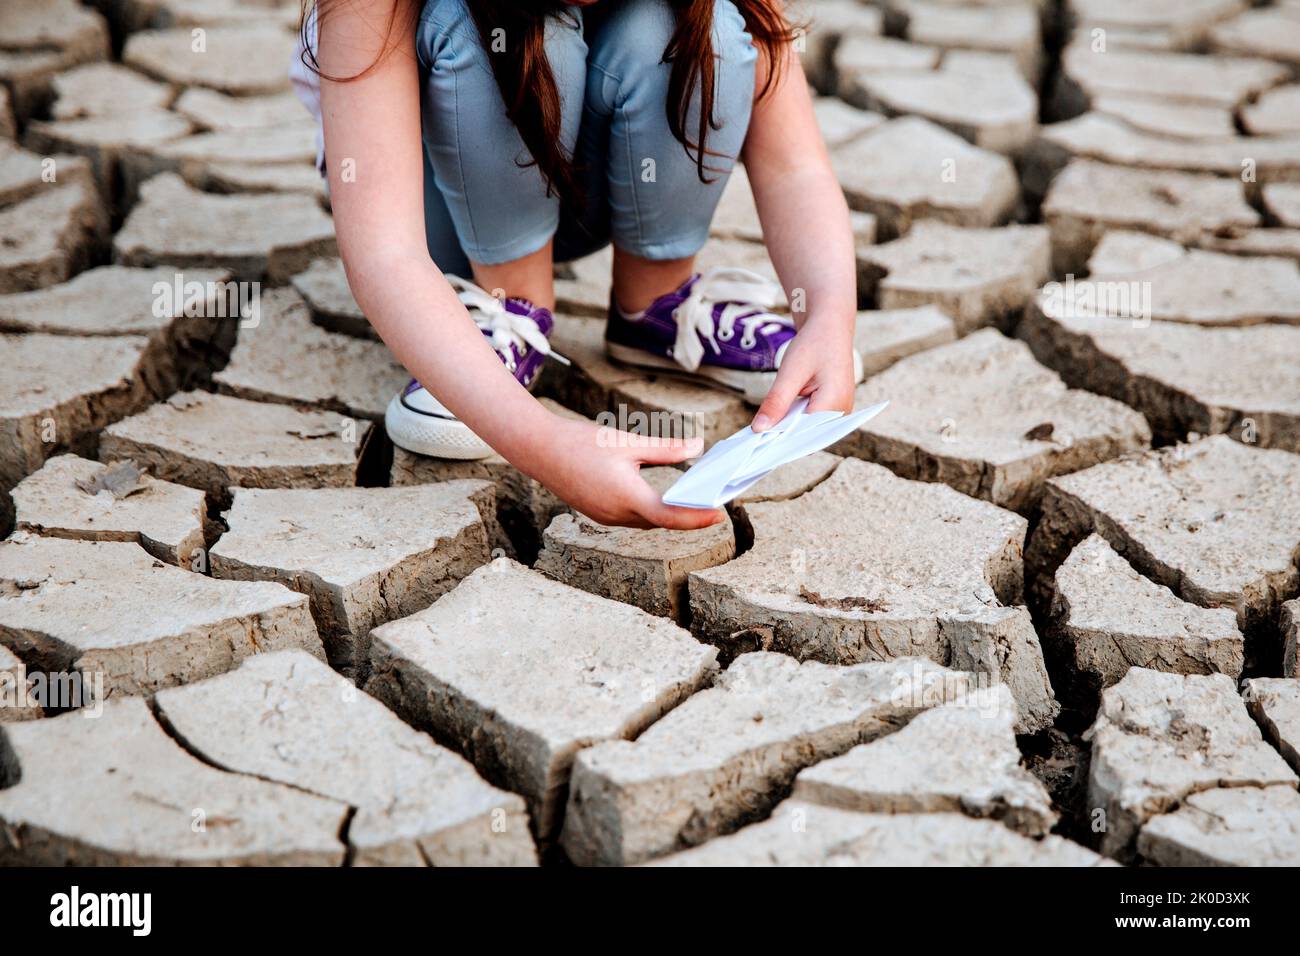 The girl lowers the paper boat onto the dry, cracked ground. Water crisis and climate change concept. Global warming Stock Photo